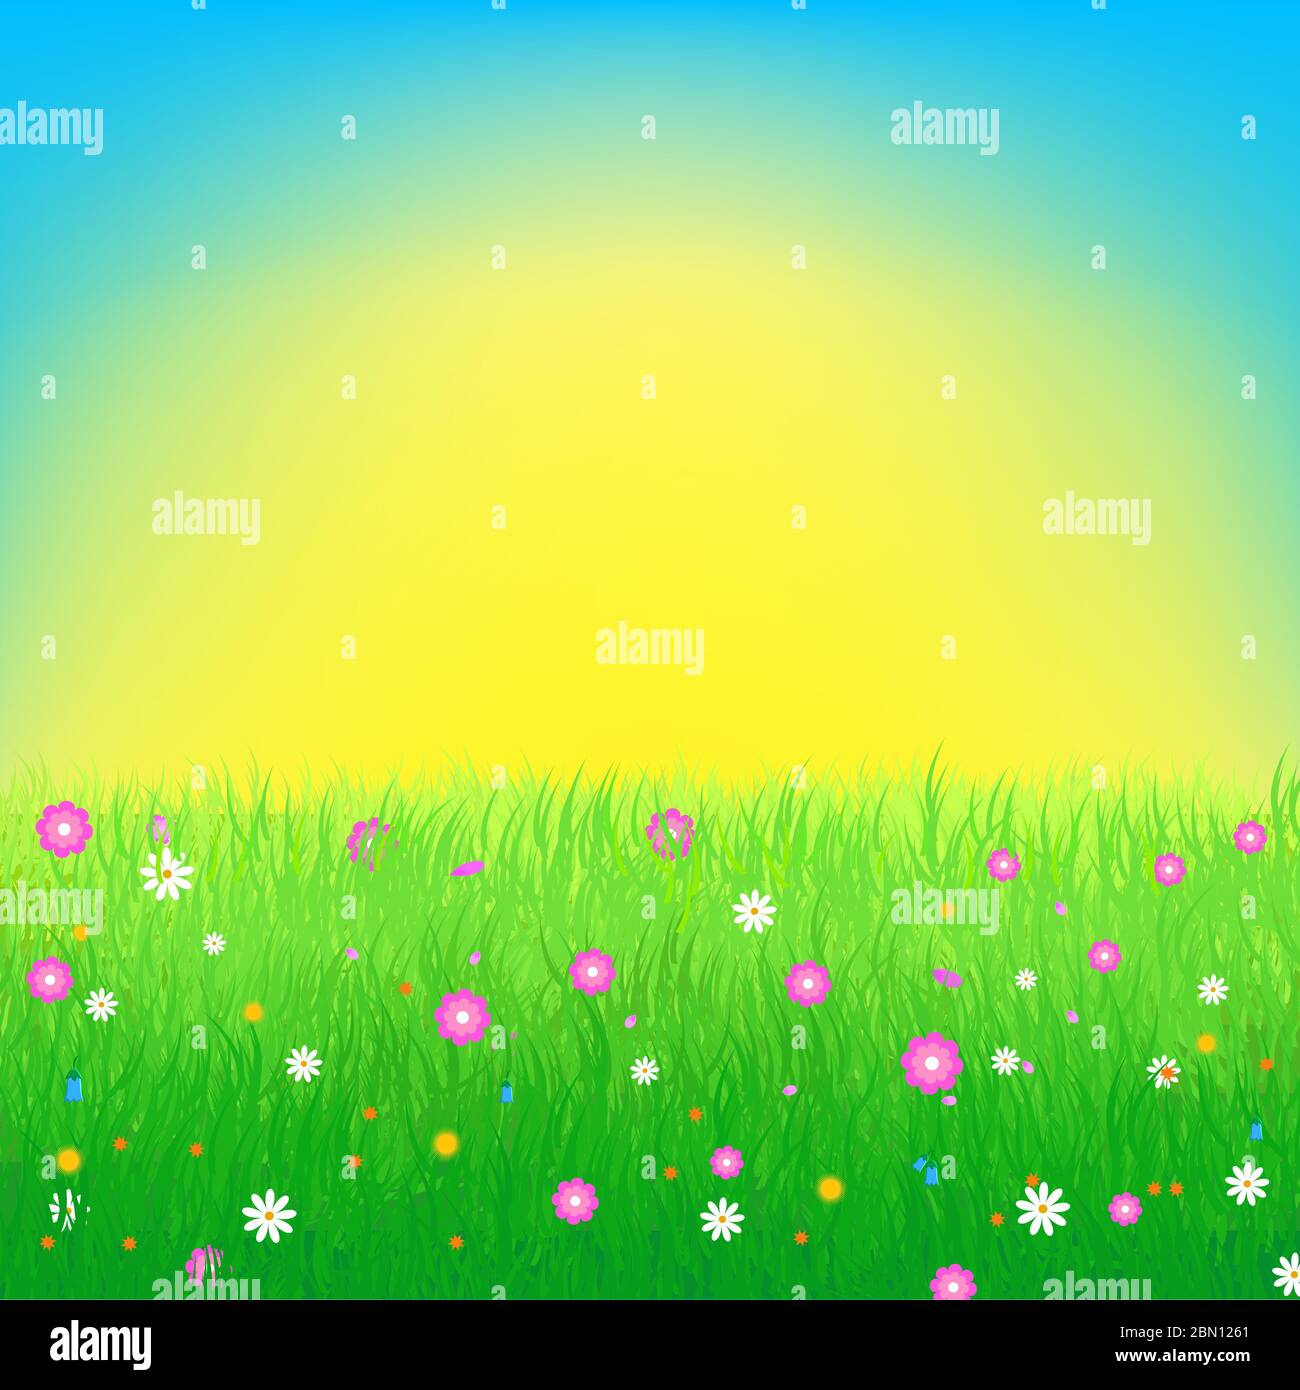 Summer, spring vector illustration featuring lush meadow with colorful flowers and sun on blue sky. Great for greeting cards, web banners, summer sale Stock Vector